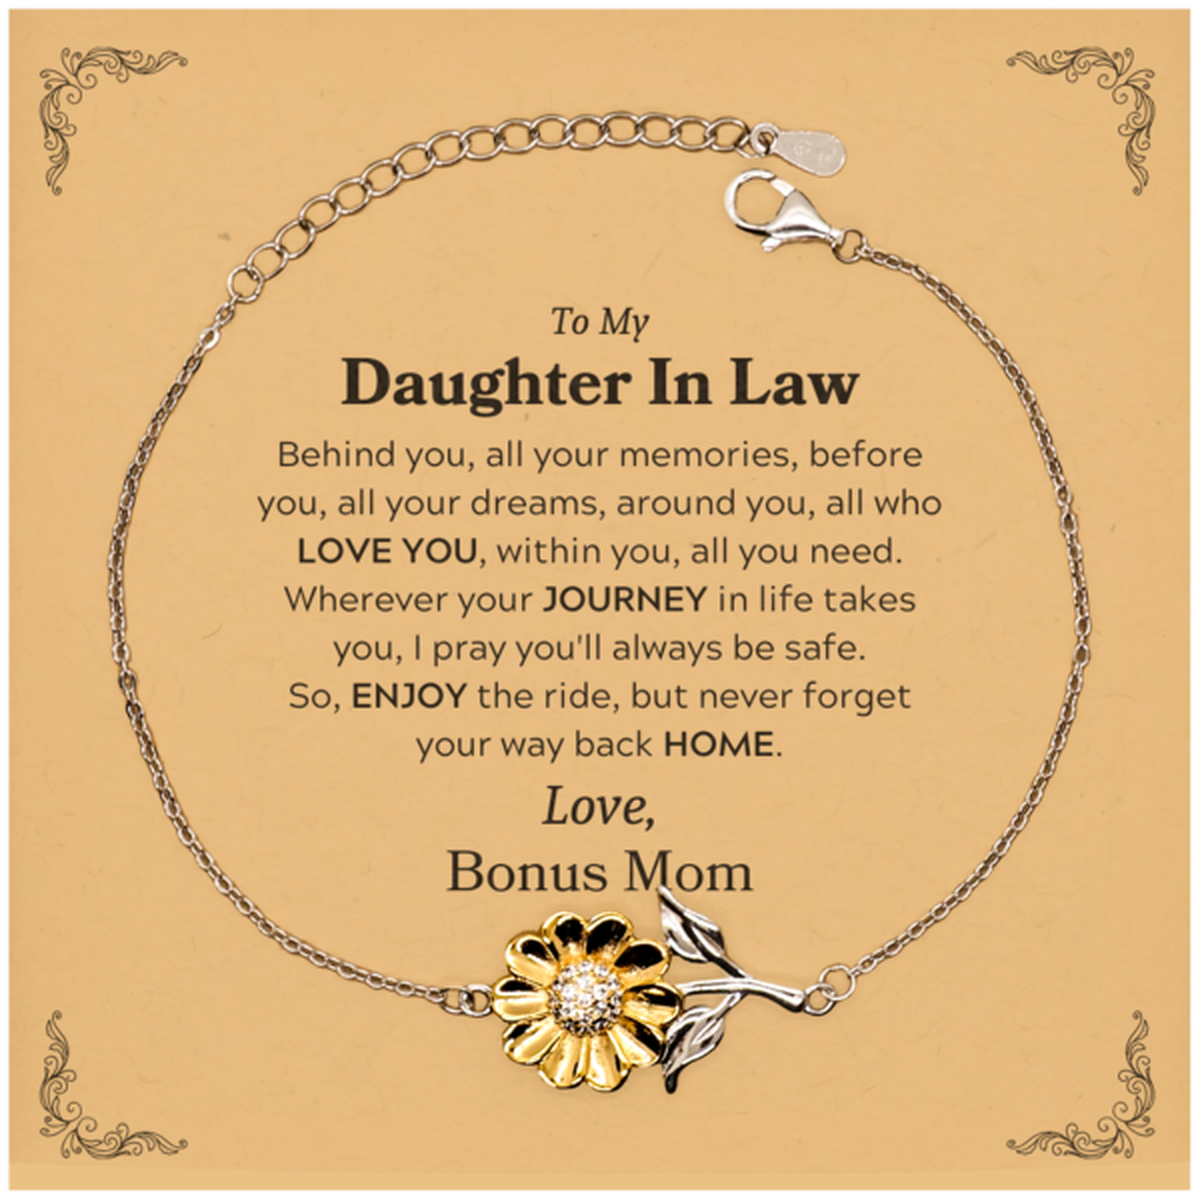 To My Daughter In Law Graduation Gifts from Bonus Mom, Daughter In Law Sunflower Bracelet Christmas Birthday Gifts for Daughter In Law Behind you, all your memories, before you, all your dreams. Love, Bonus Mom